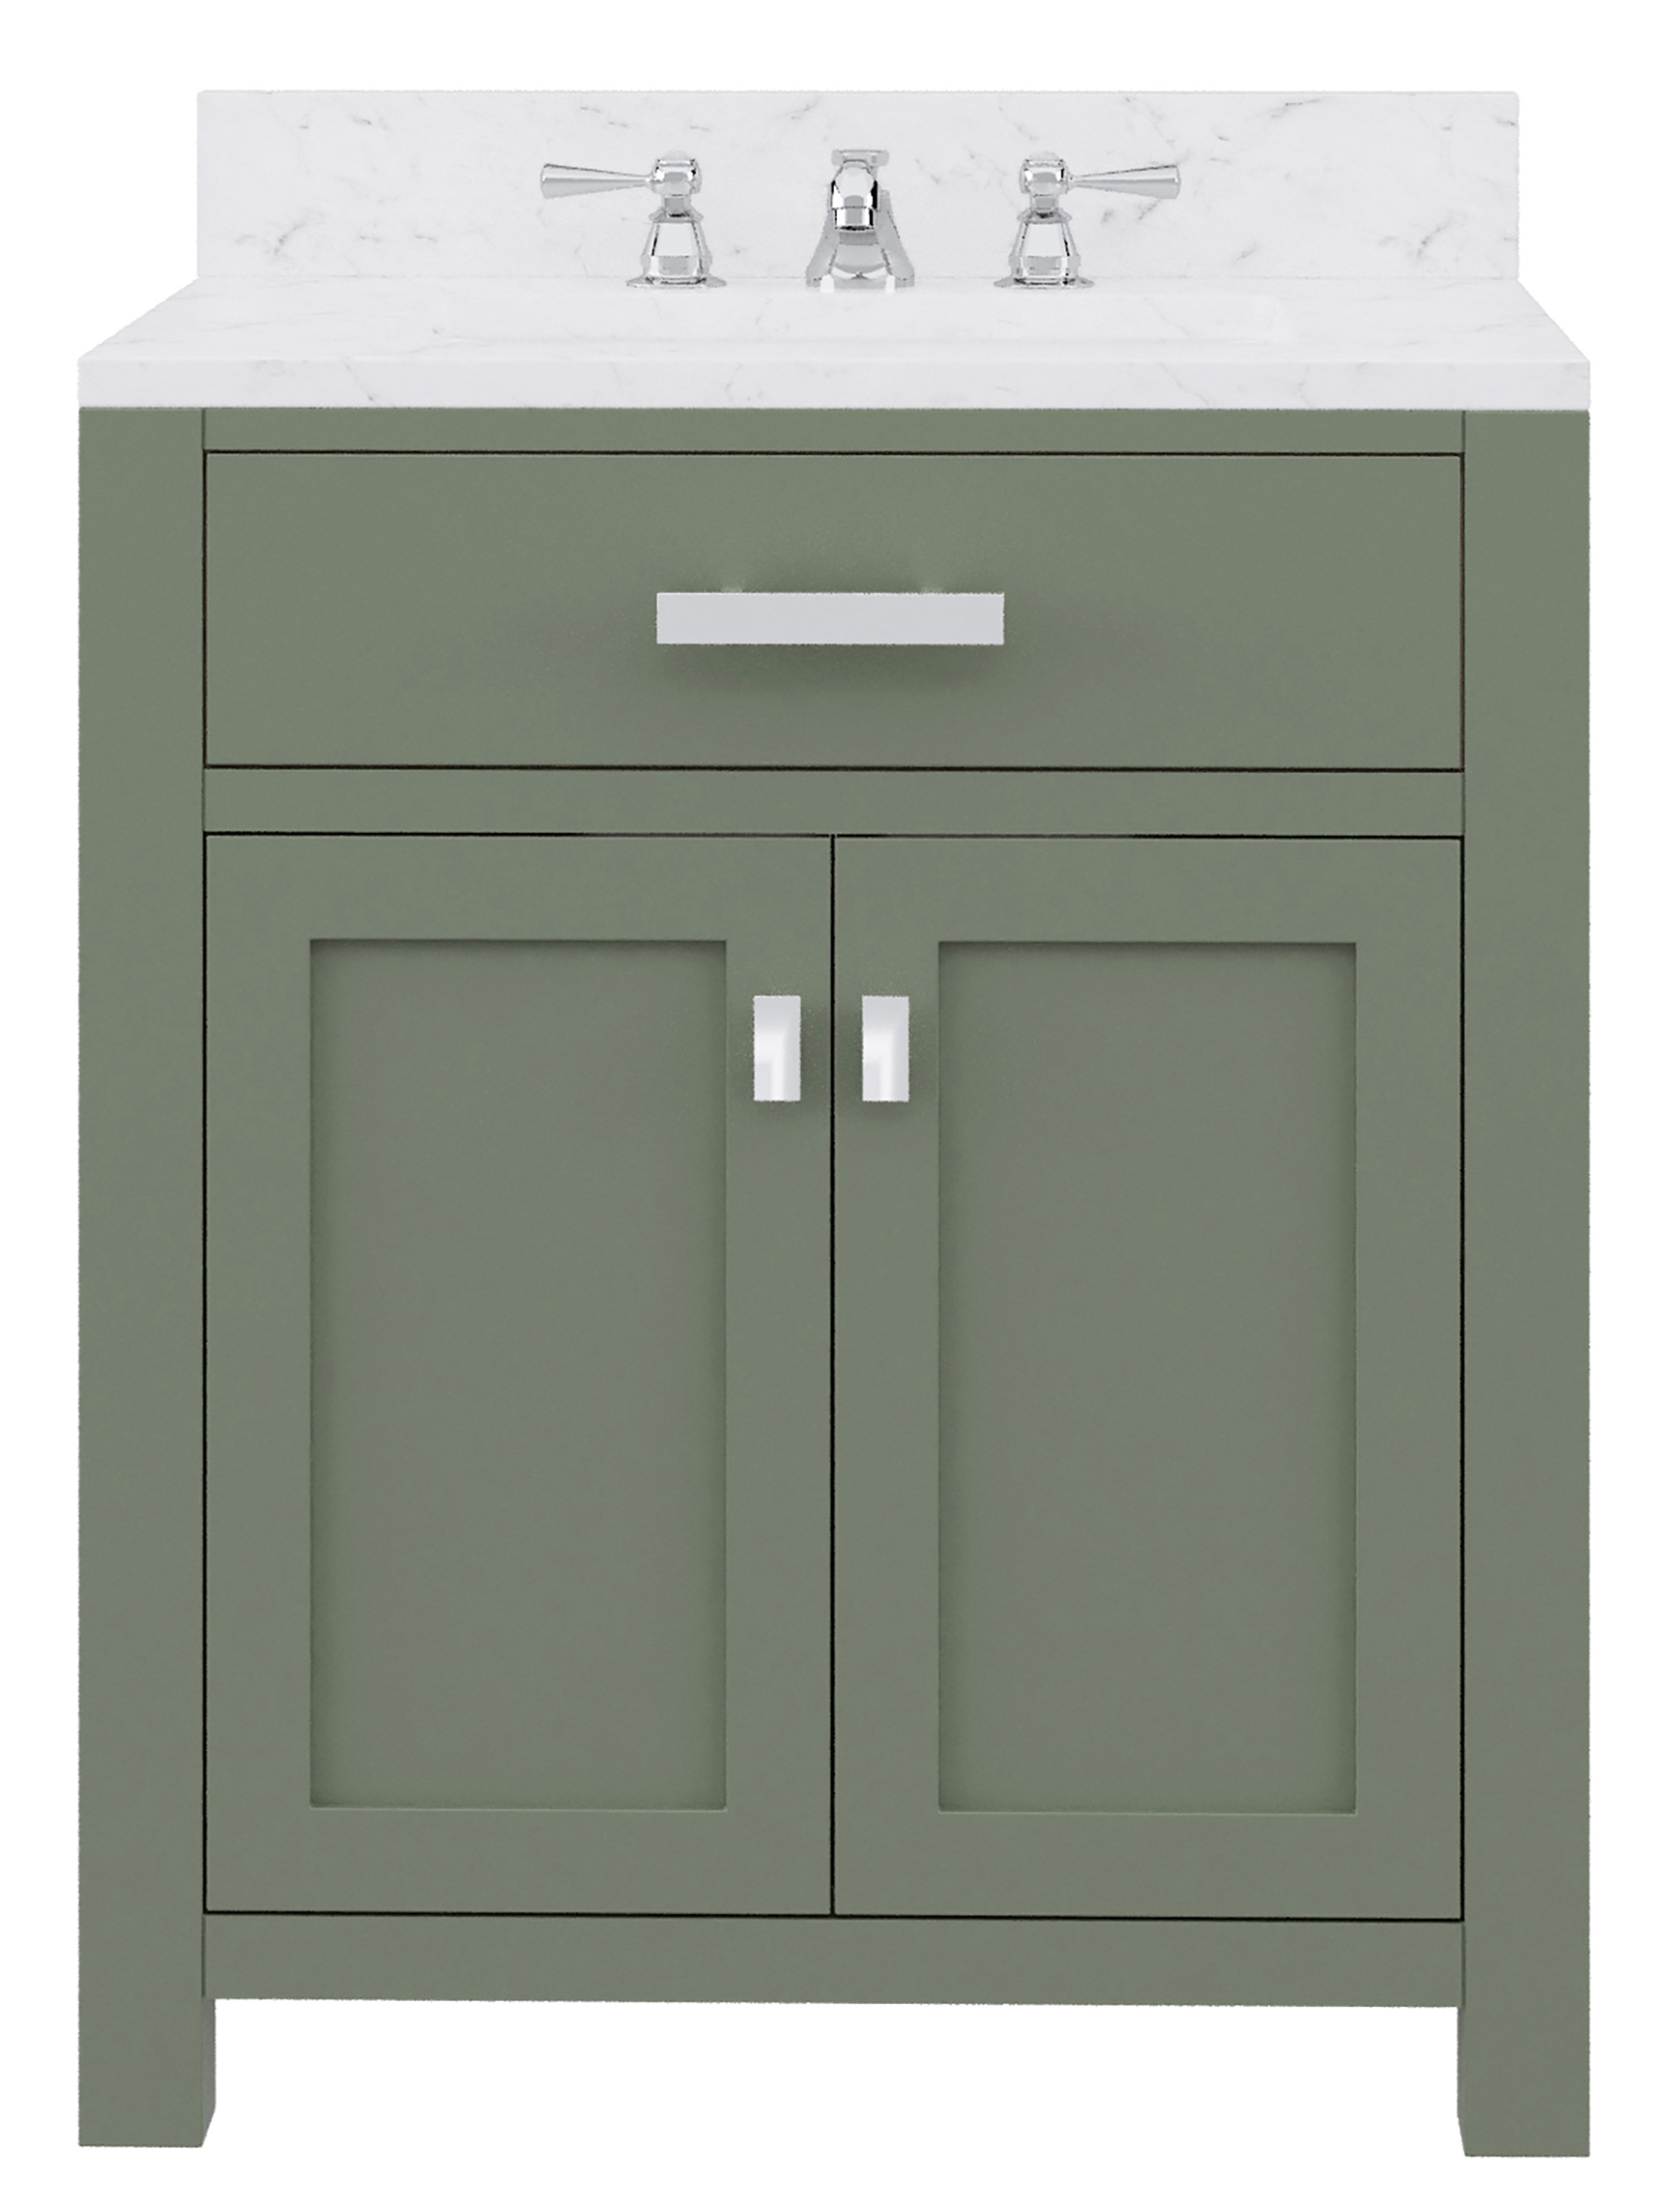 30" Single Sink Carrara White Marble Countertop Vanity in Glacial Green with Mirror and Faucet Options